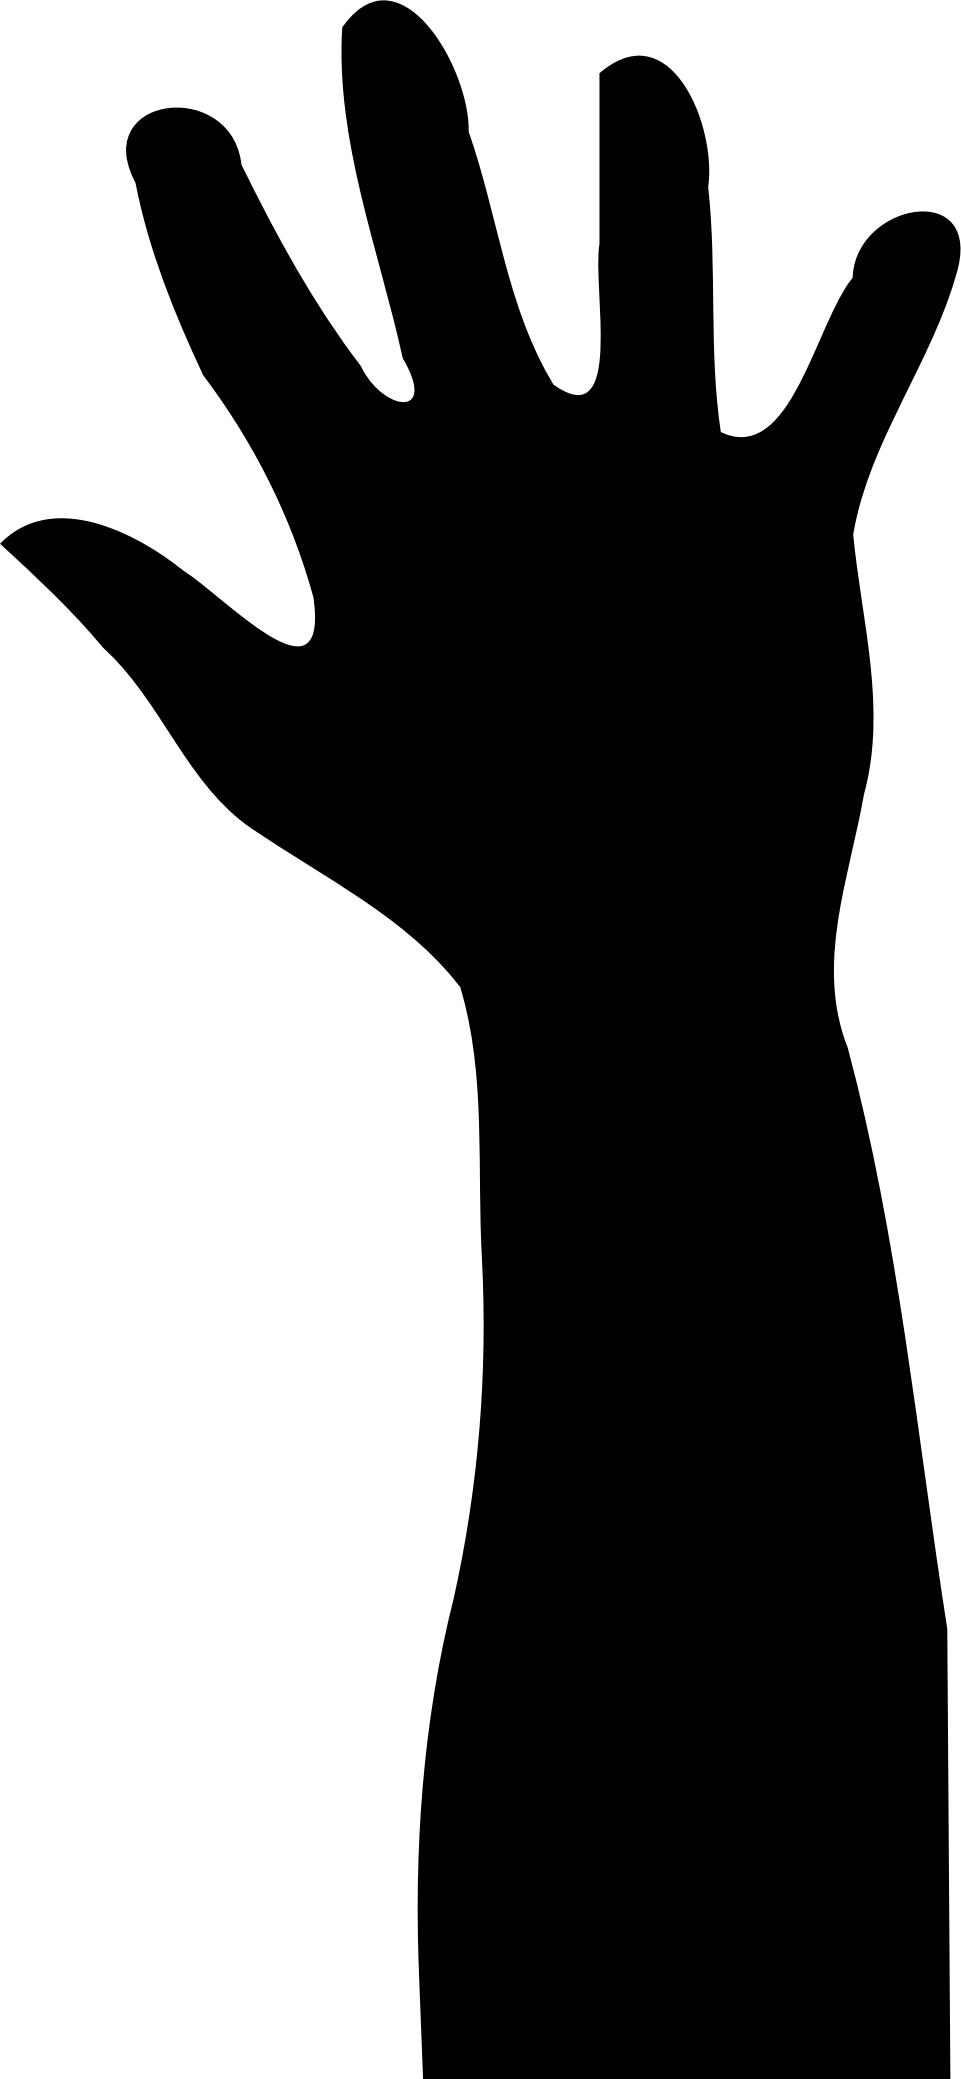 Raised Hand in Silhouette png